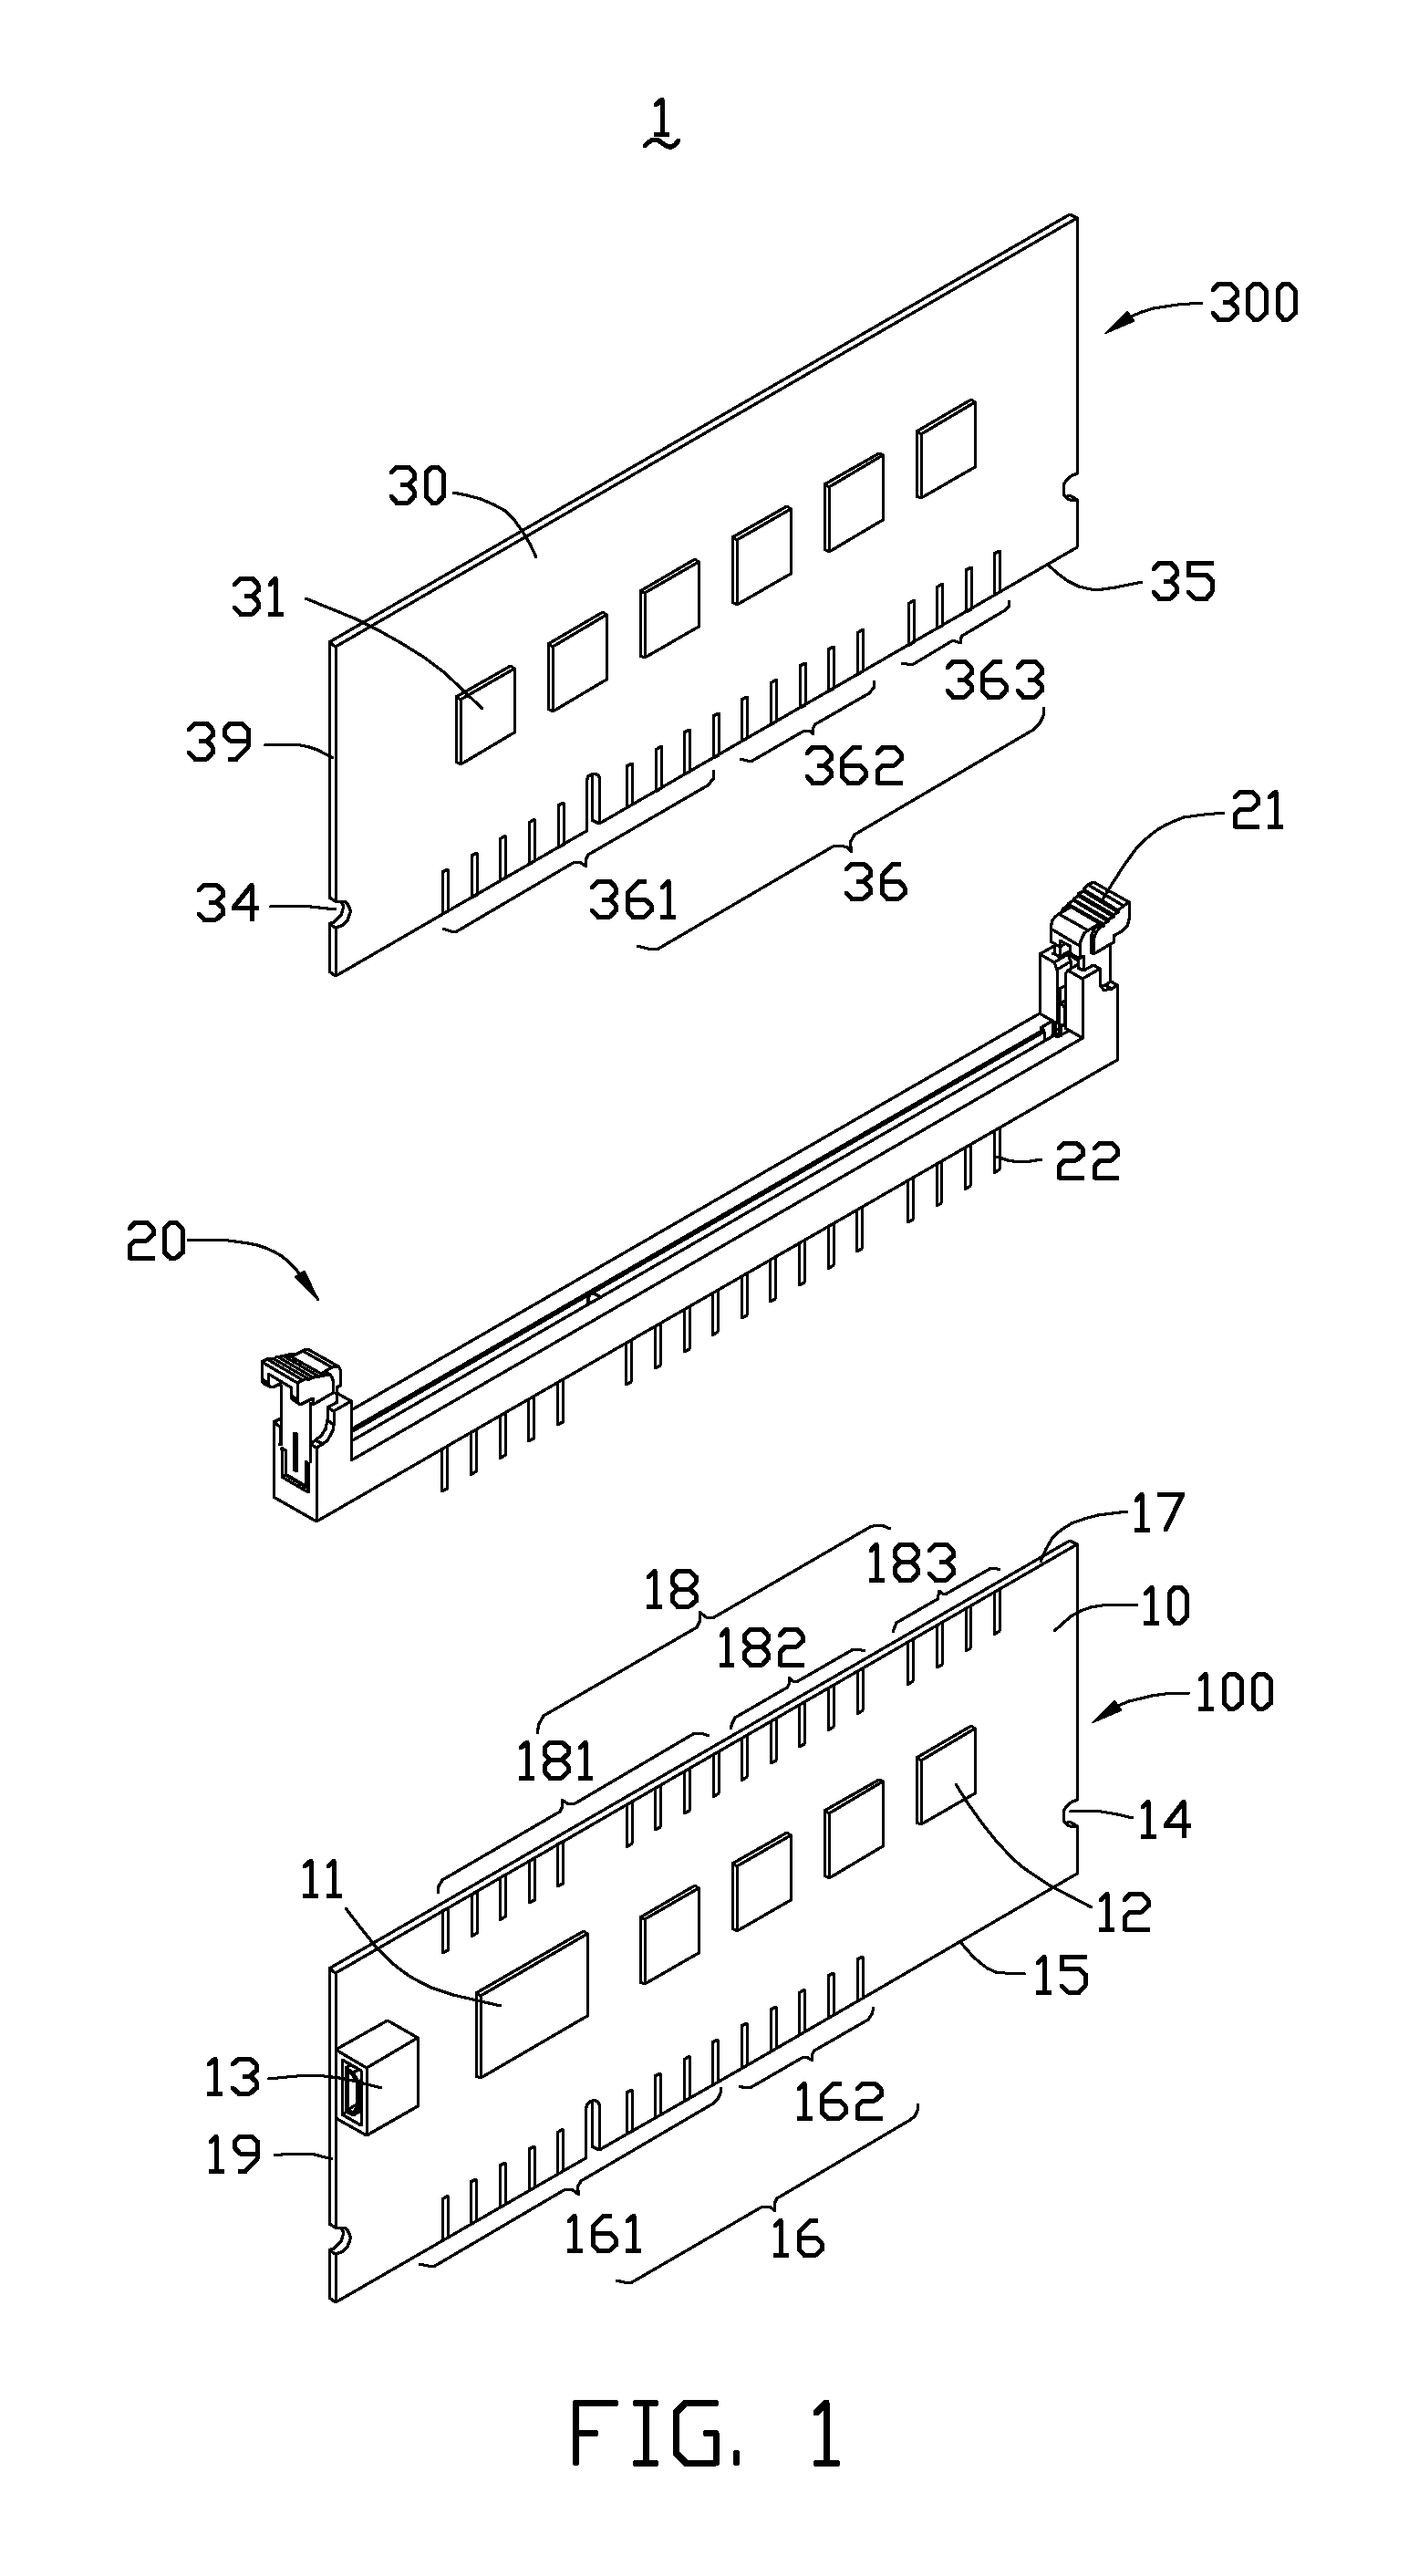 Serial advanced technology attachment dual in-line memory module assembly